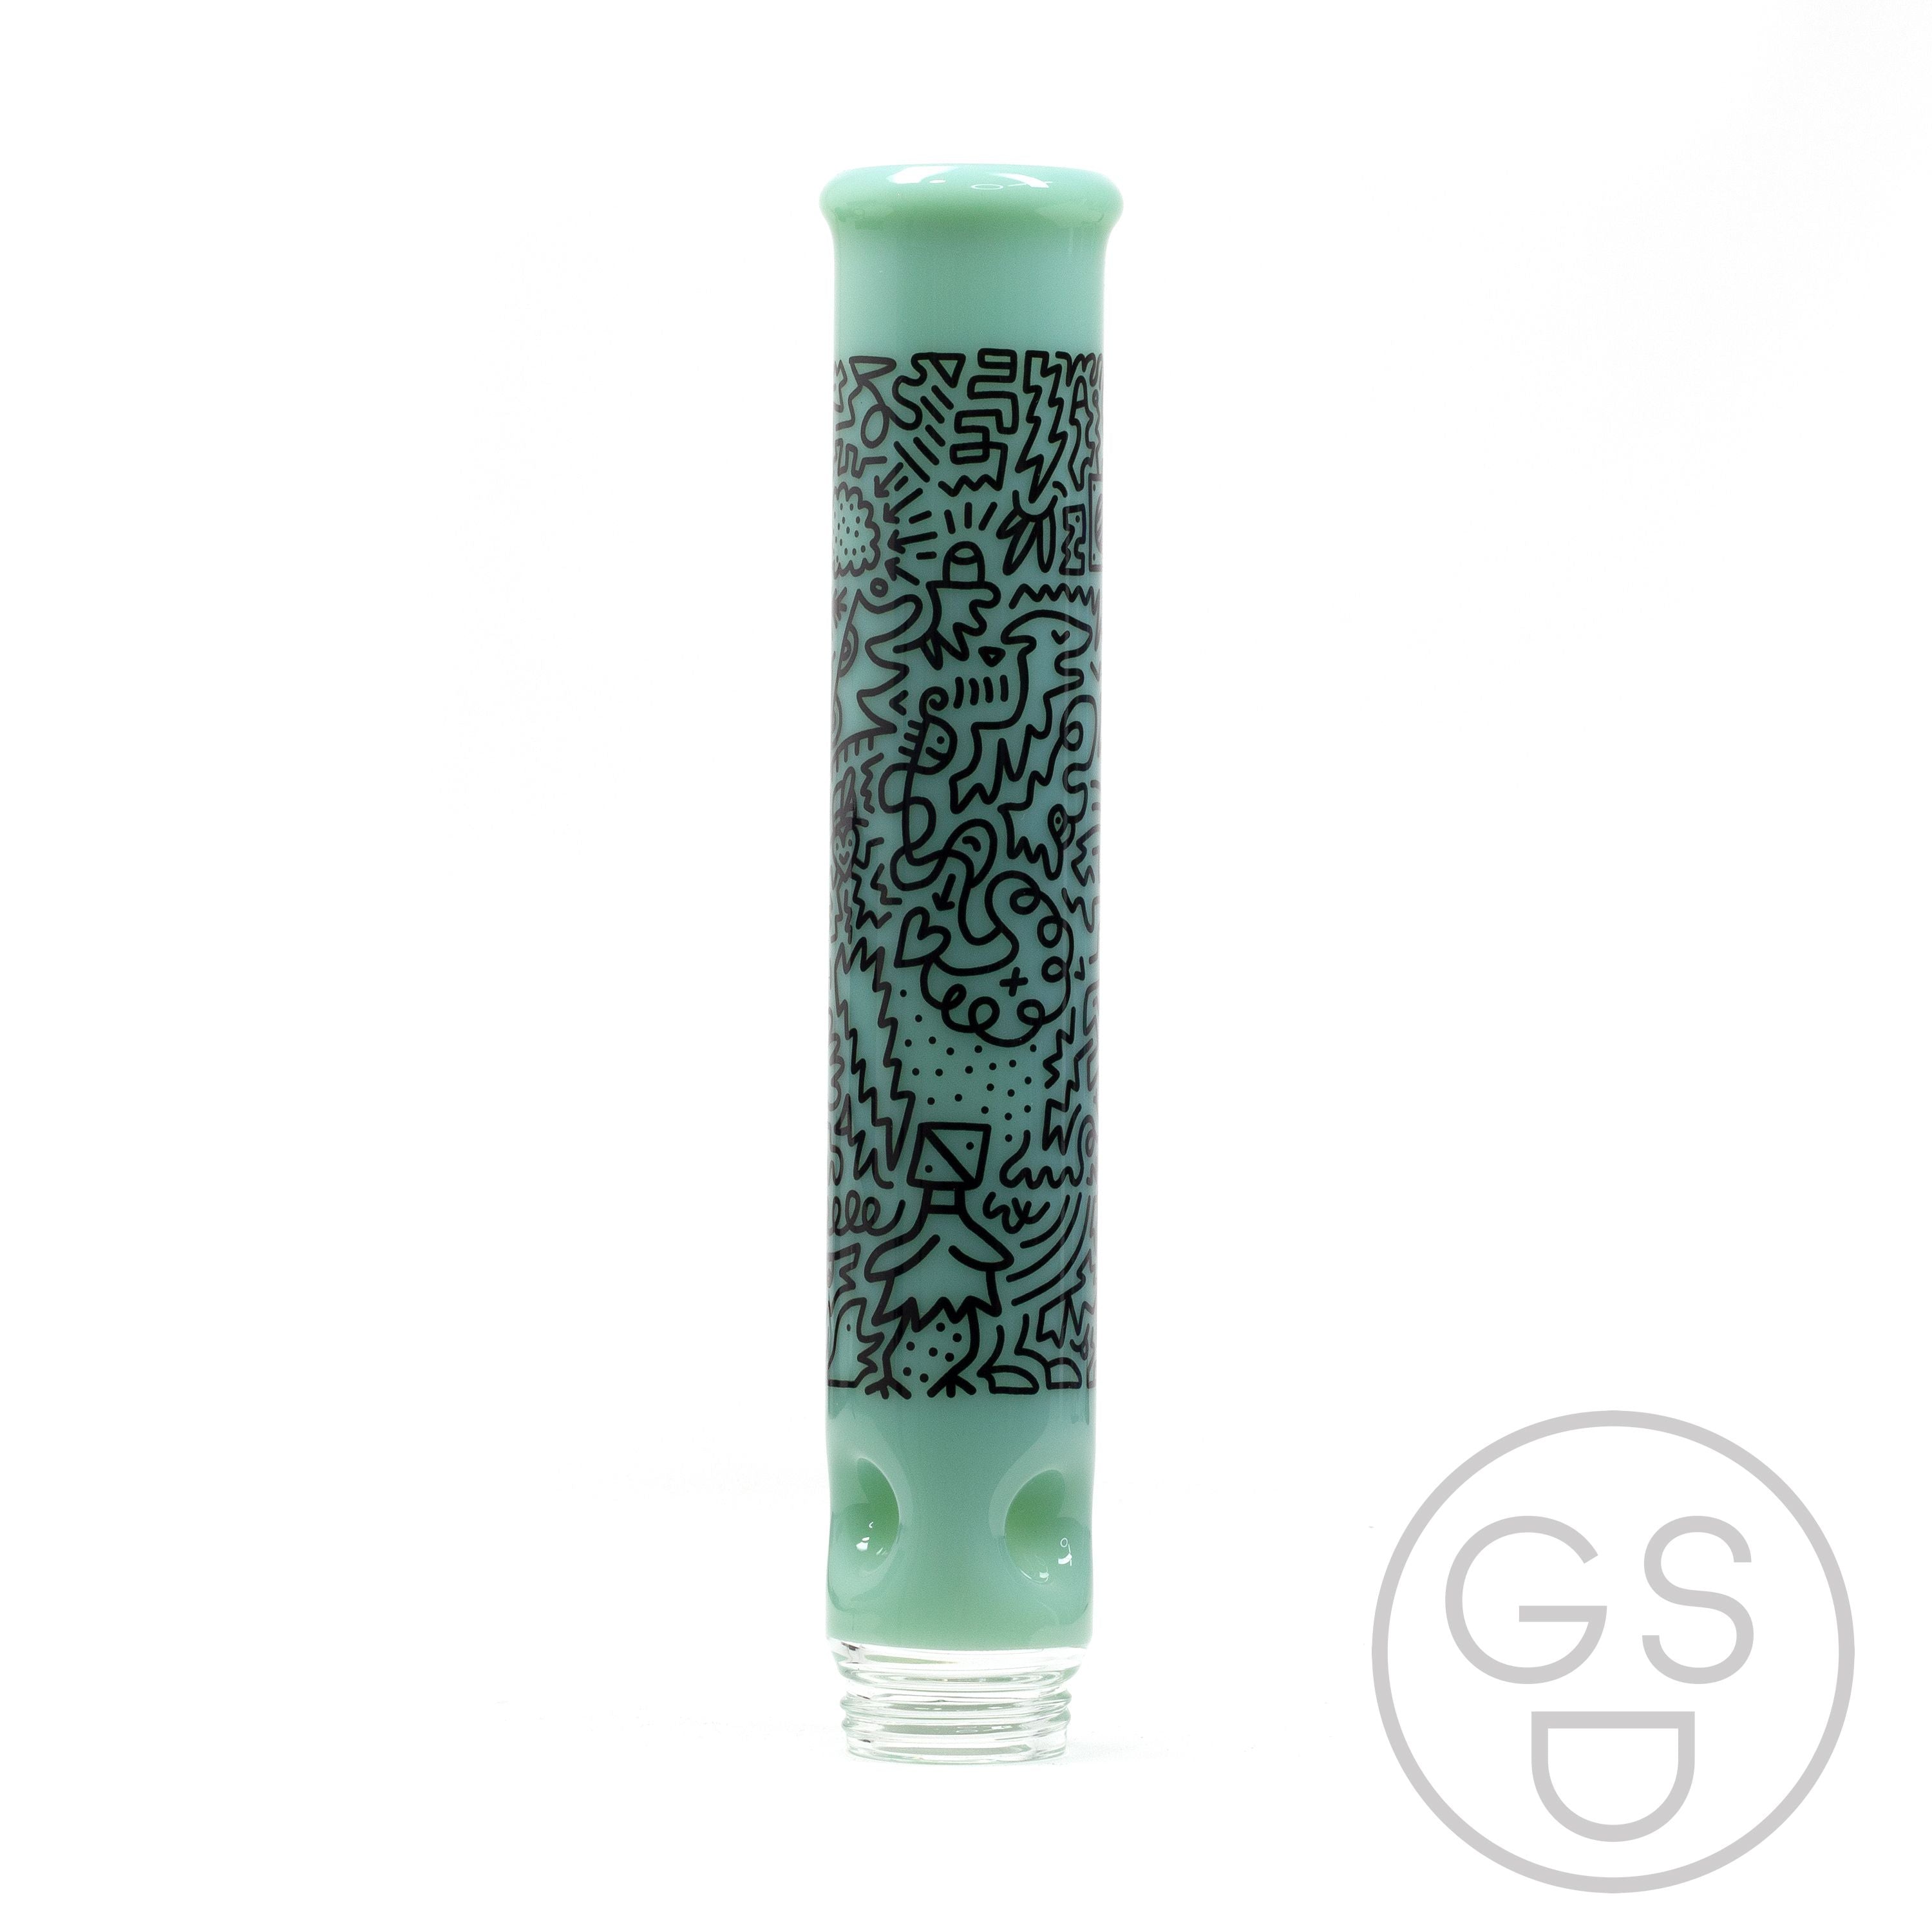 Prism Modular Waterpipe Tall Mouthpiece - Pretty Done / Mint